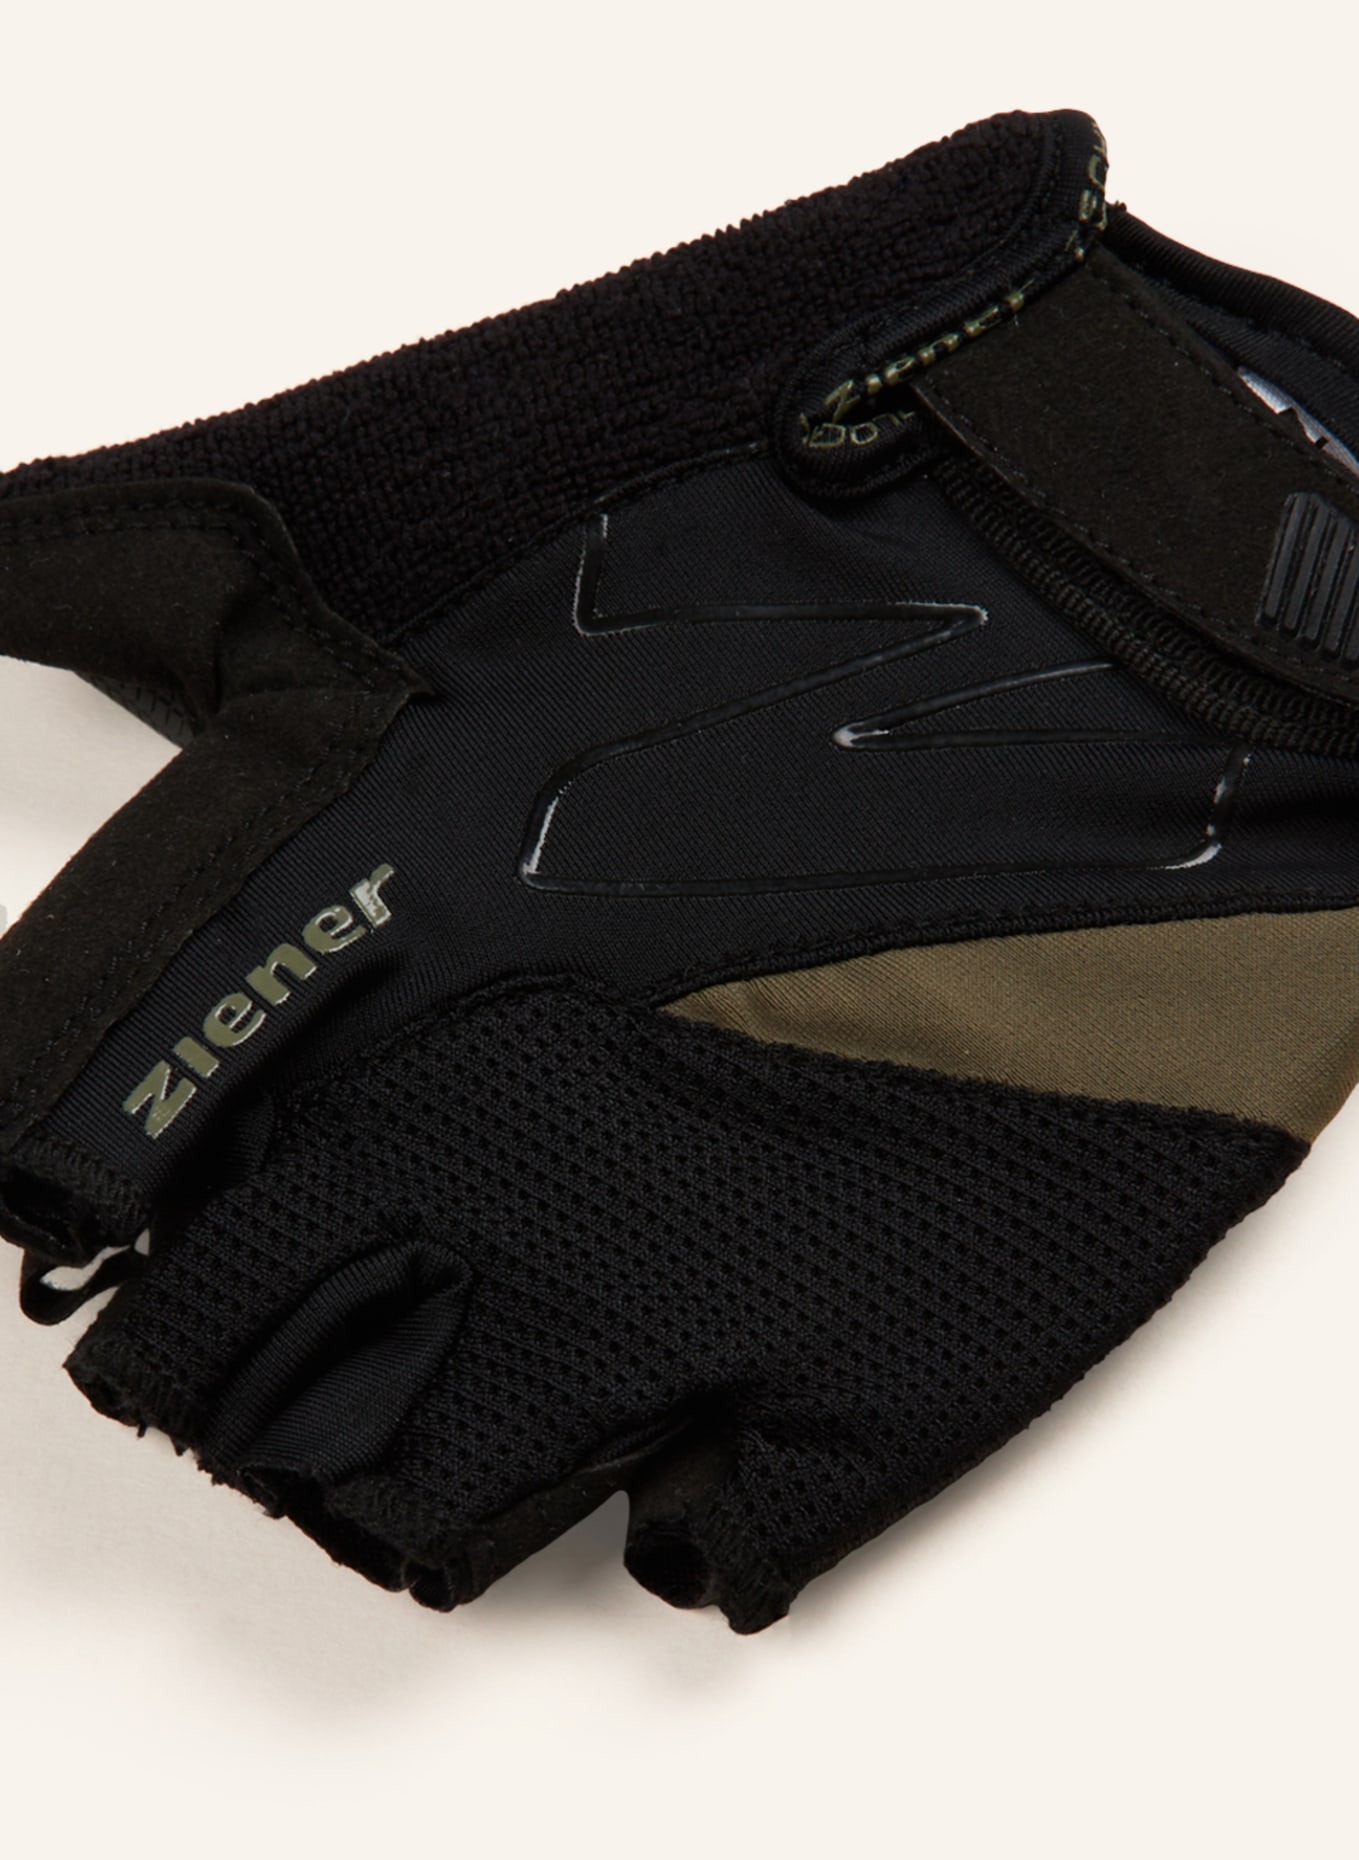 ziener CRAVE gloves in khaki Cycling black/